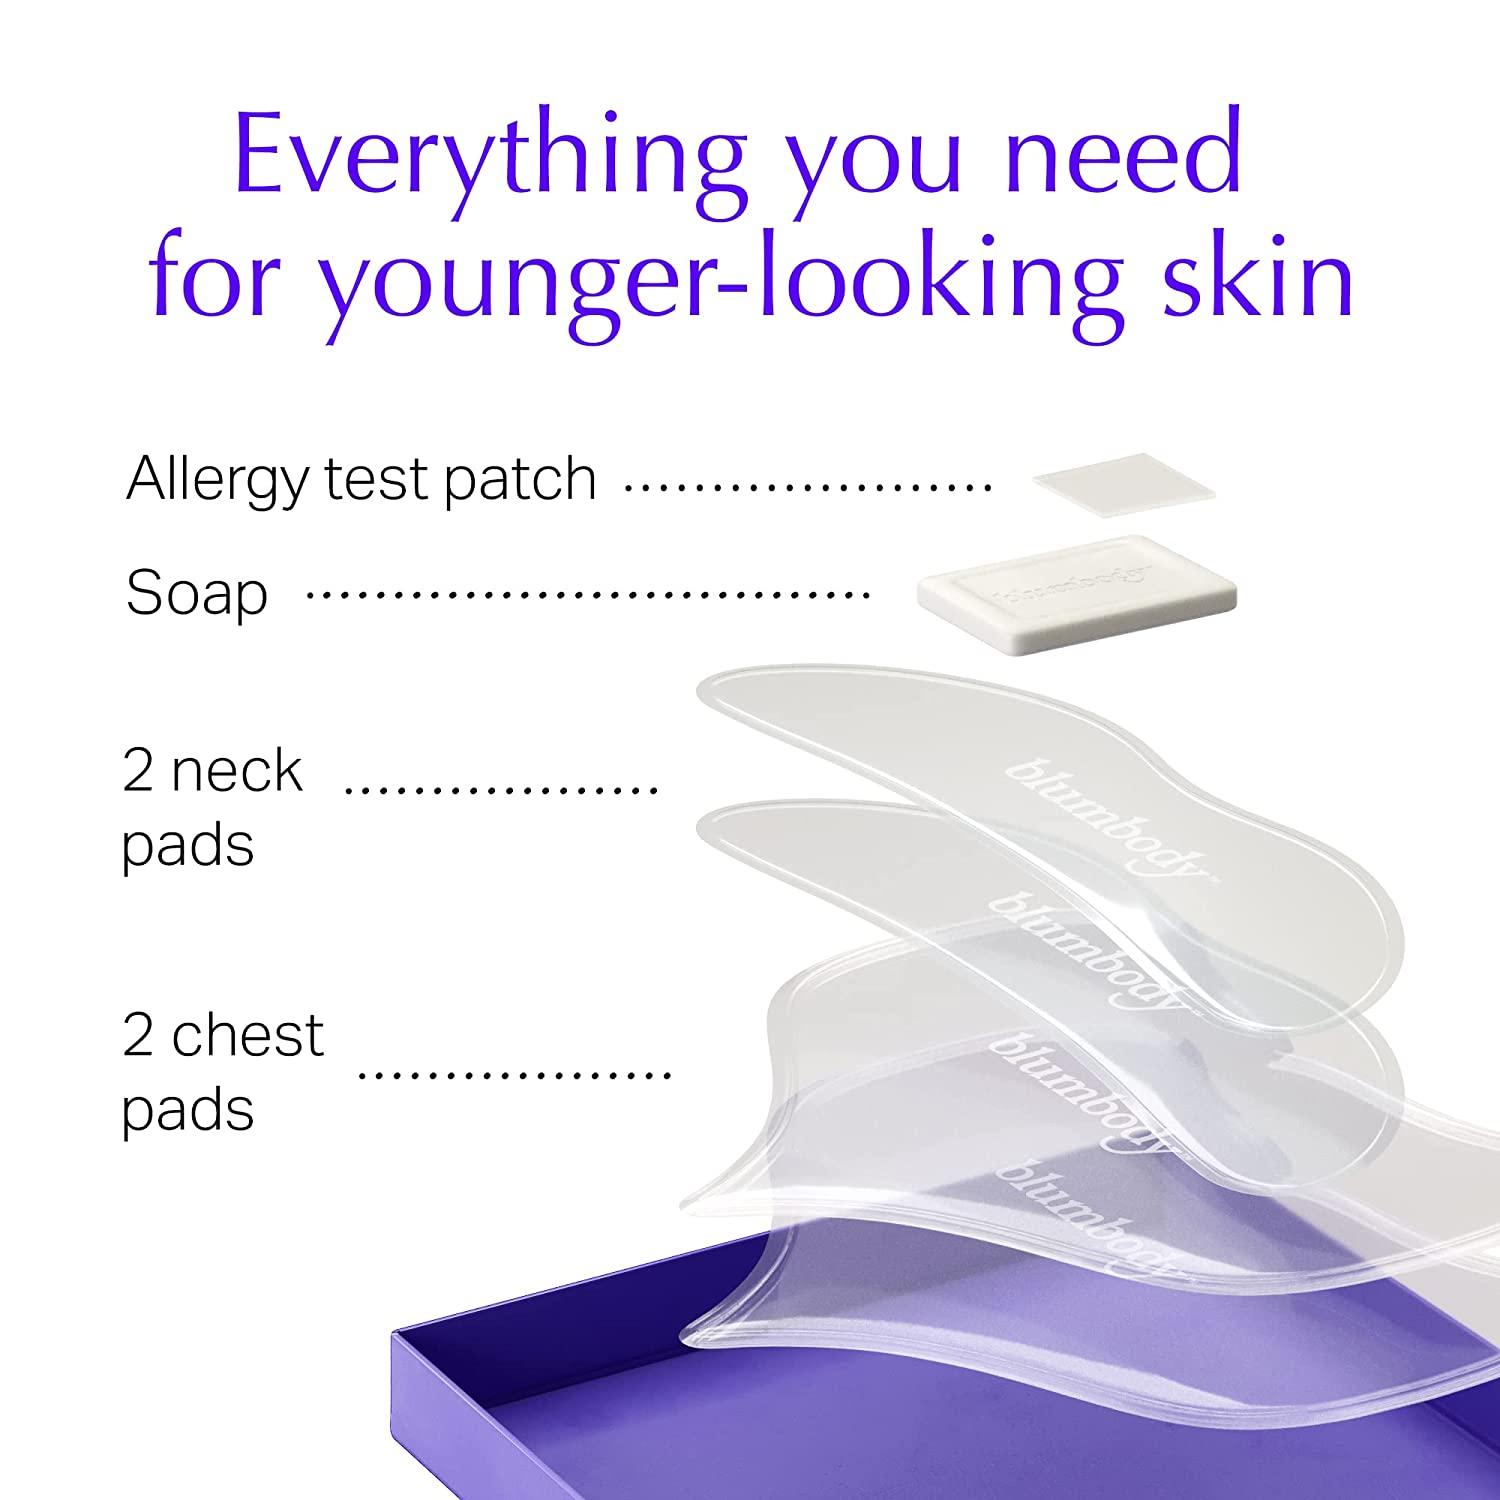 Crepe Erase Chest Wrinkle Pad | Reusable Anti Aging Skin Firming Tightening & Moisturizing Patch, Overnight Wrinkle Remover Treatment - Reusable Up